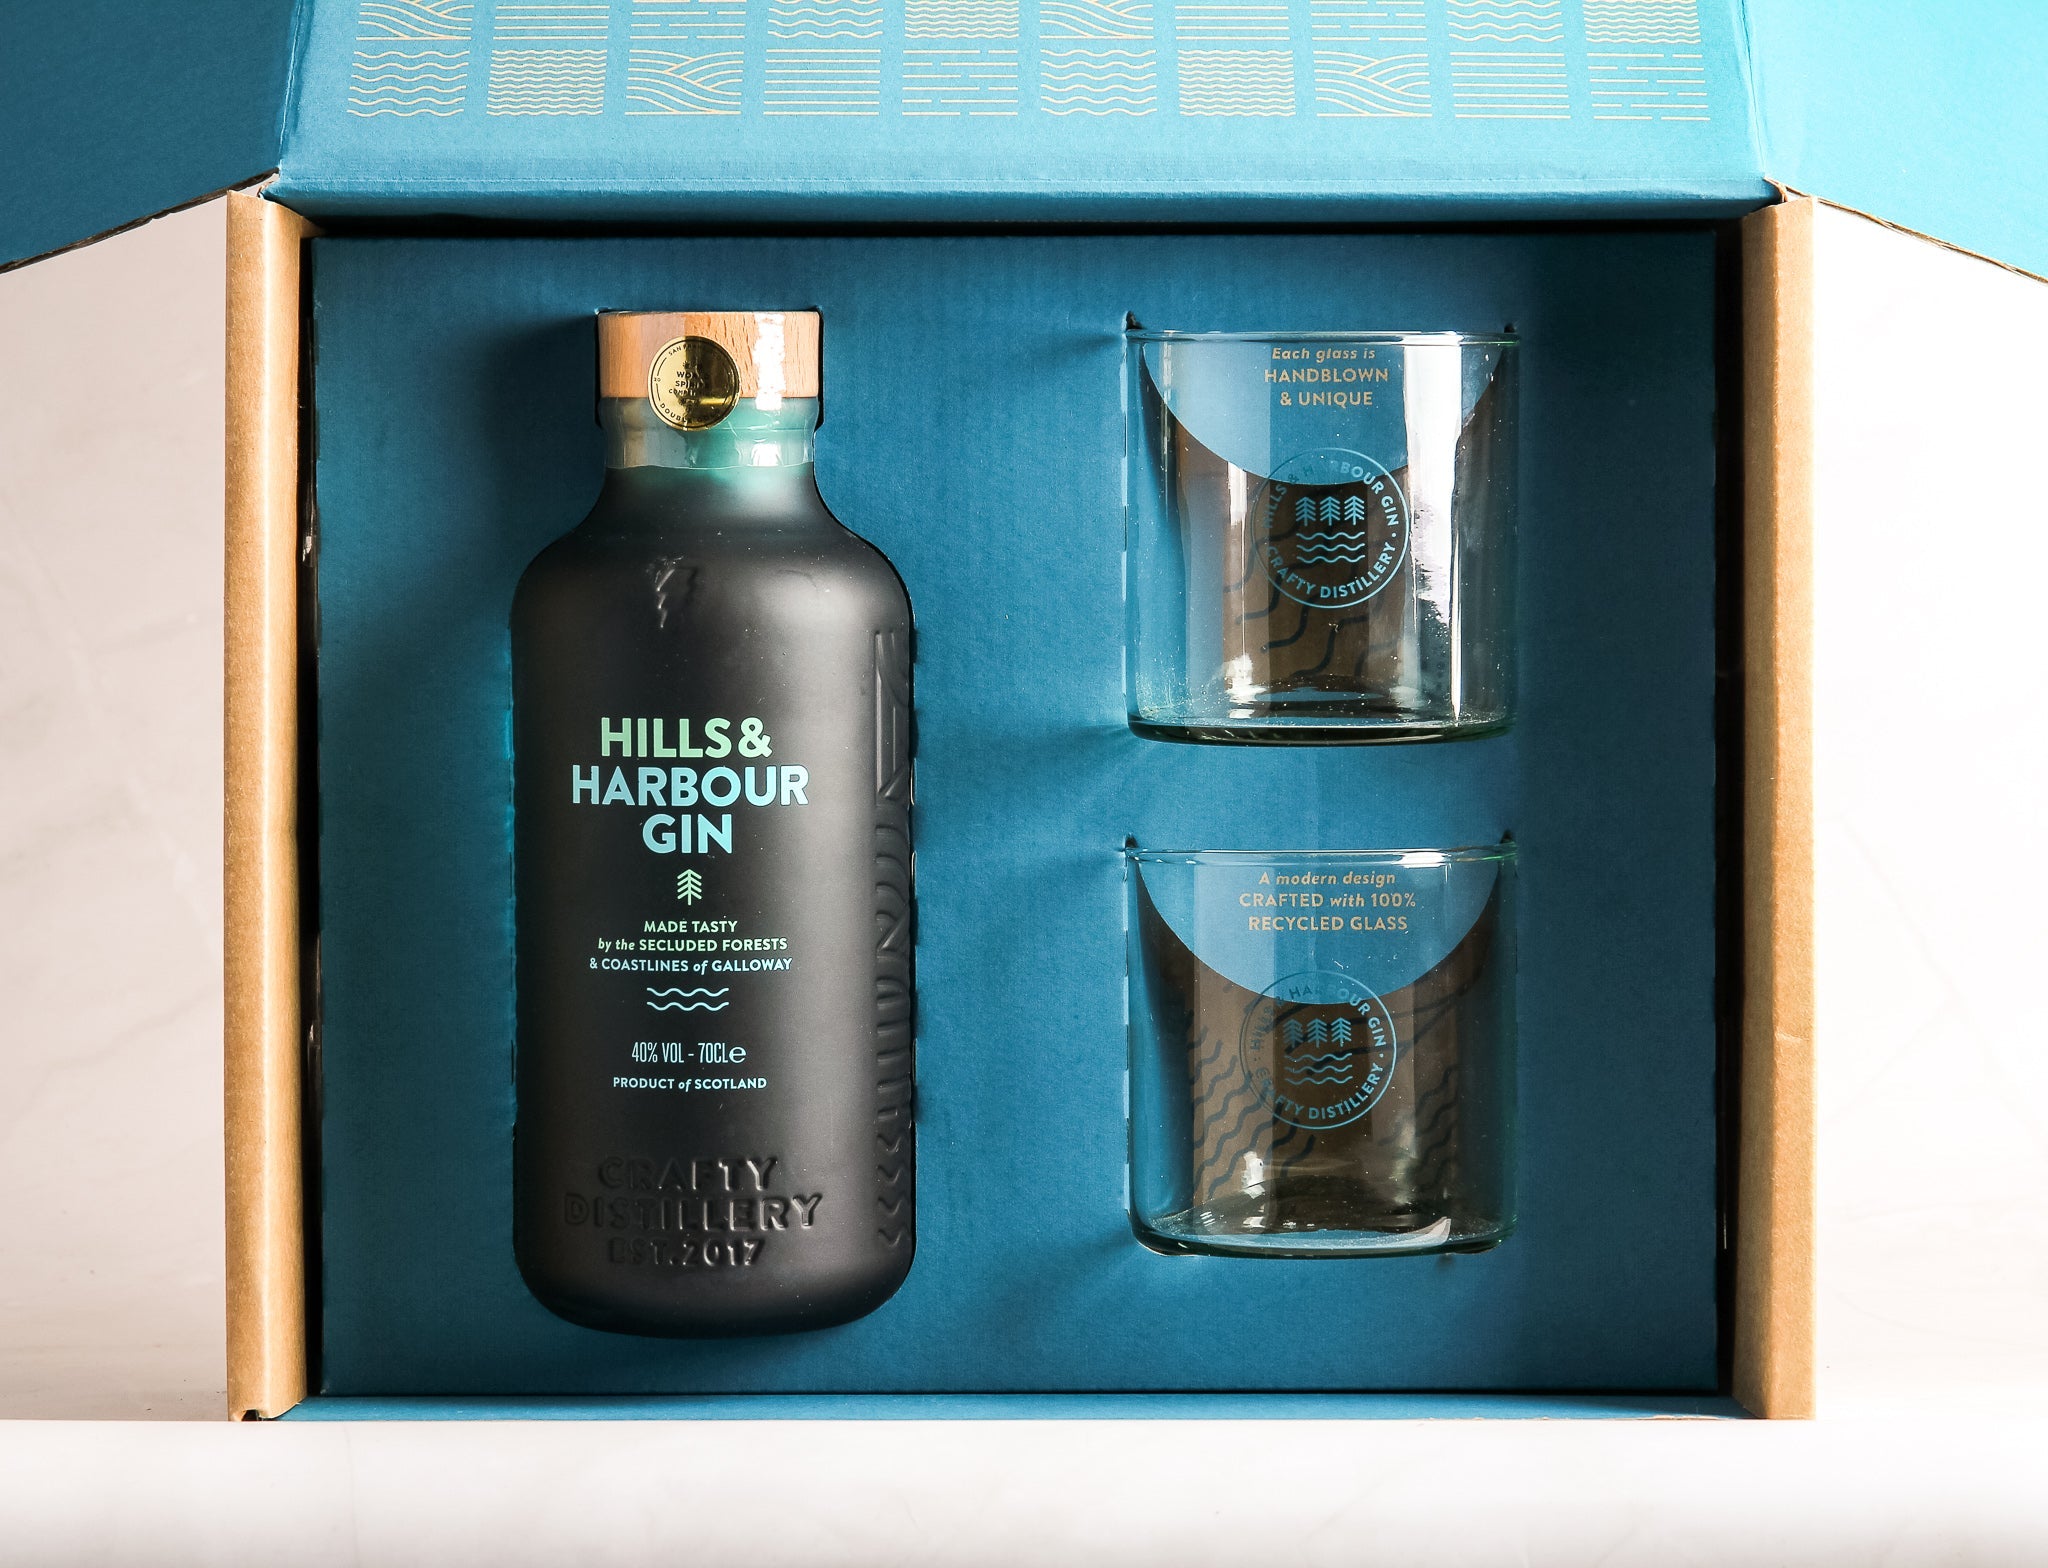 Hills & Harbour Gift Set 40% abv 70cl + Two Glasses